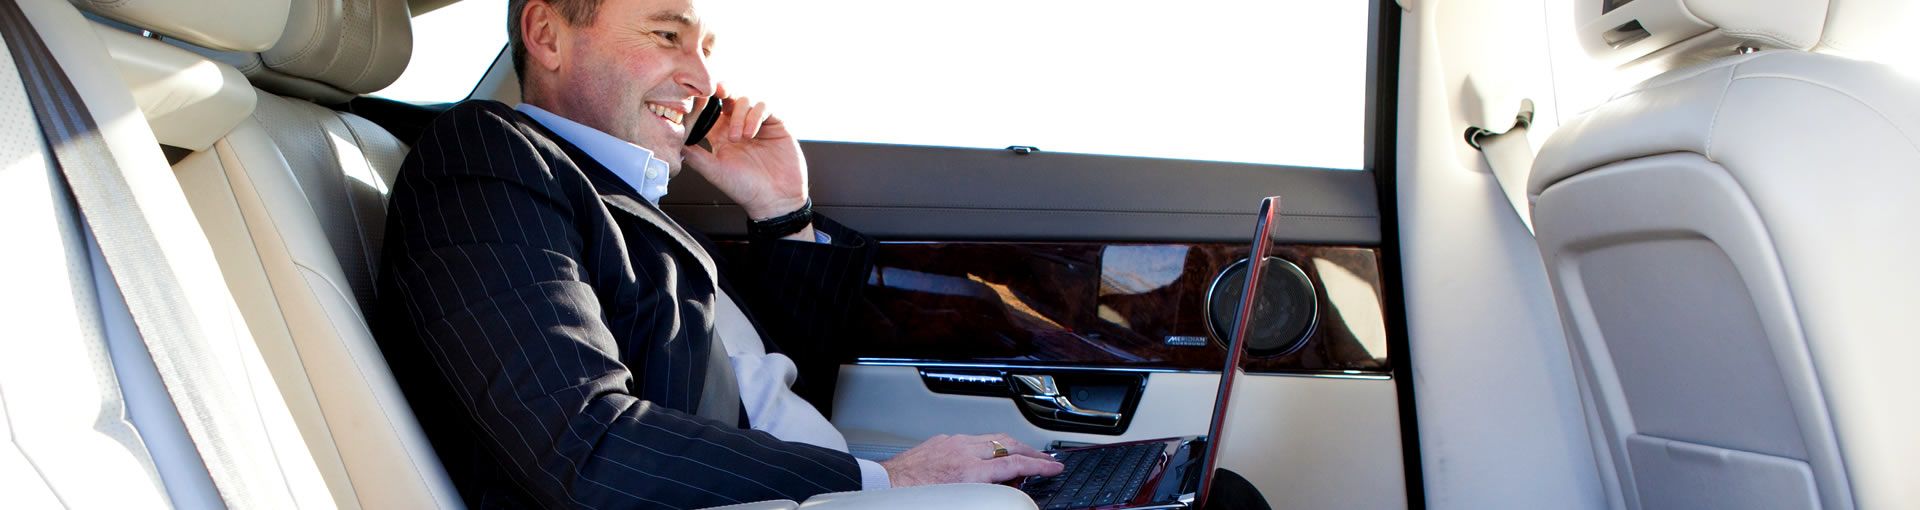 Executive Transportation Los Angeles Corporate Travel Services